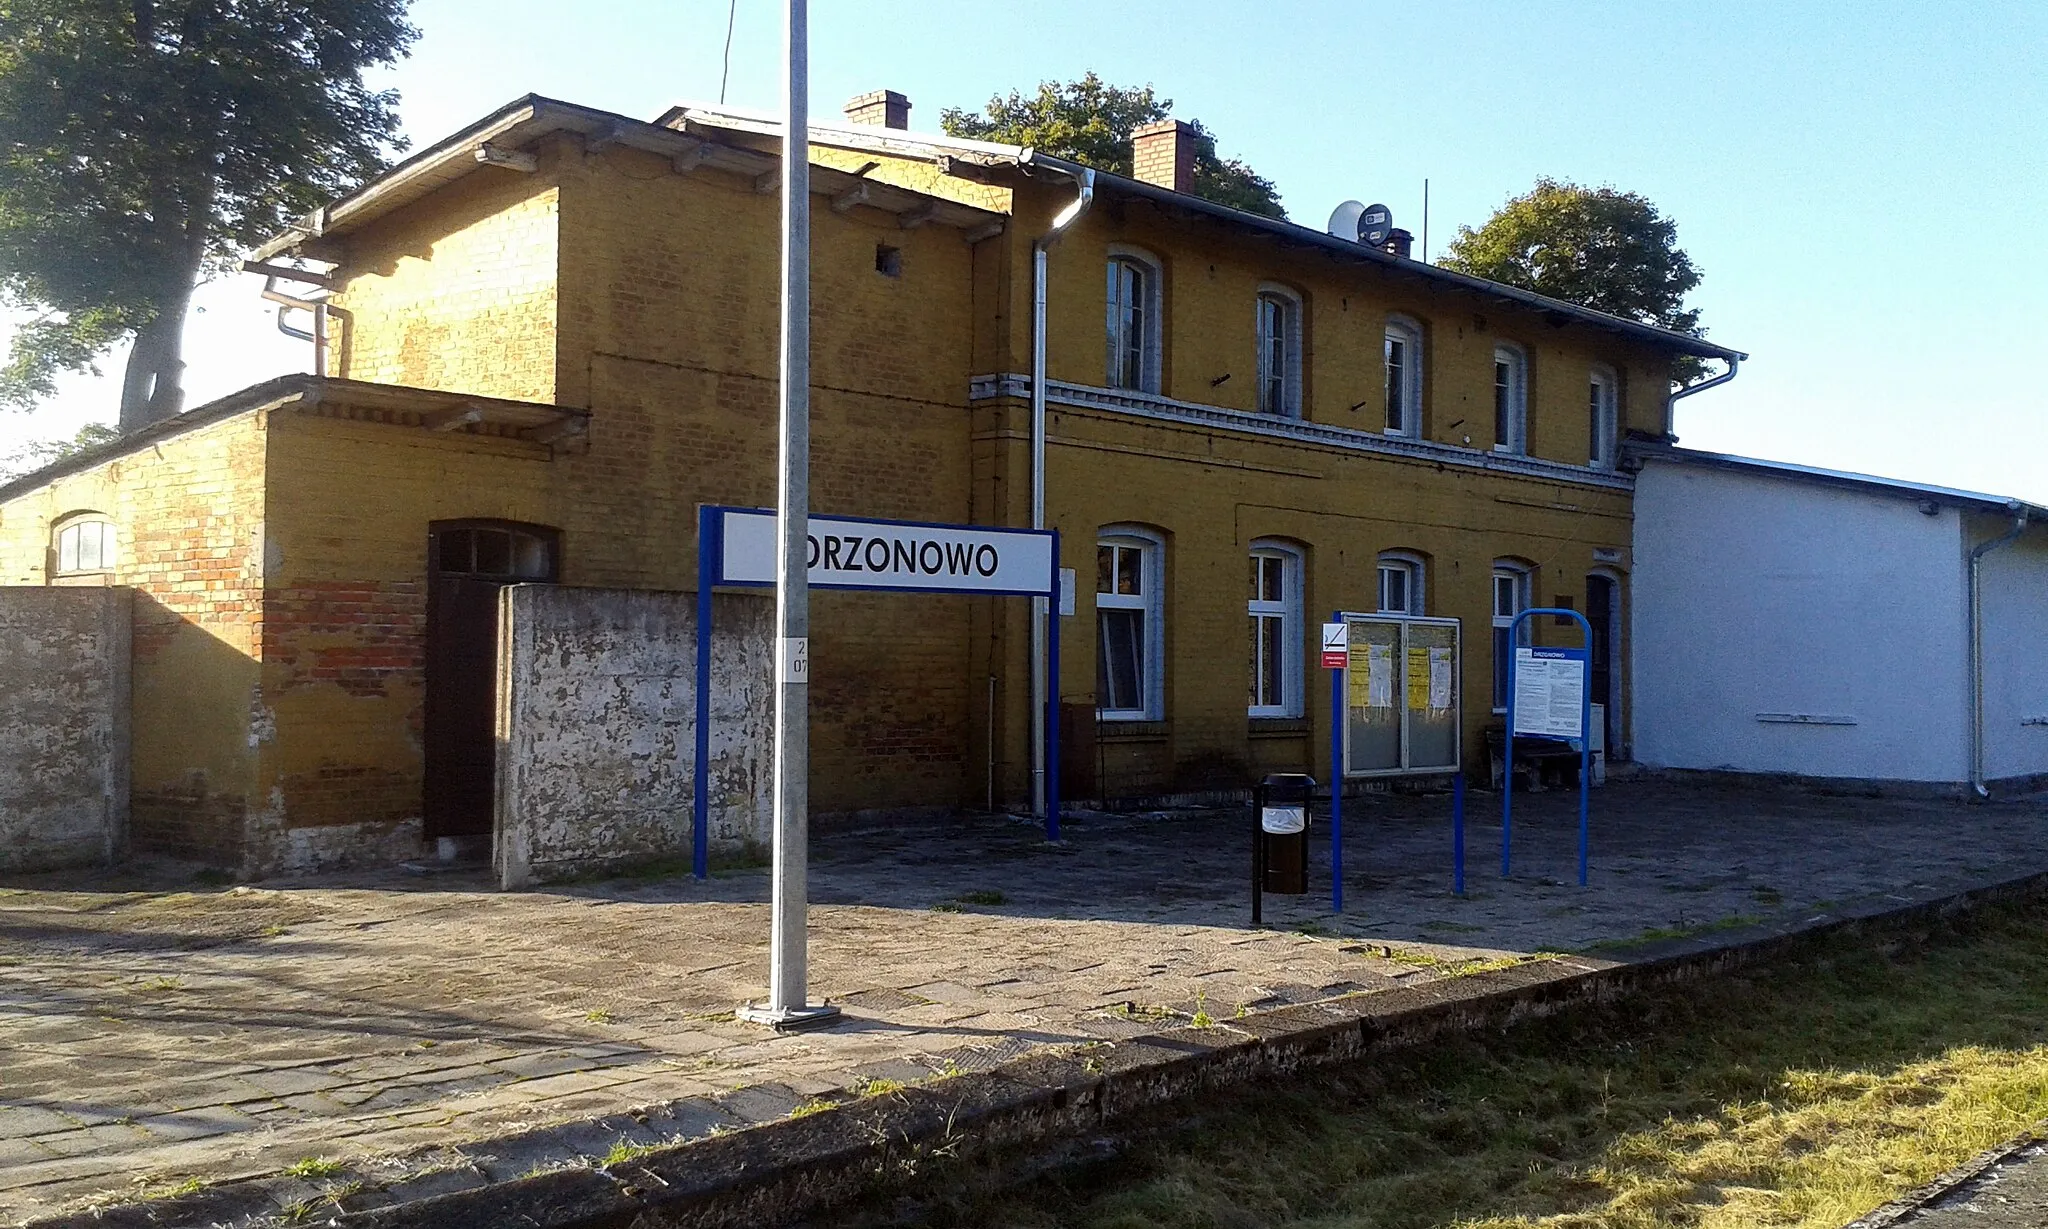 Photo showing: Train station at Drzonowo, northern Poland